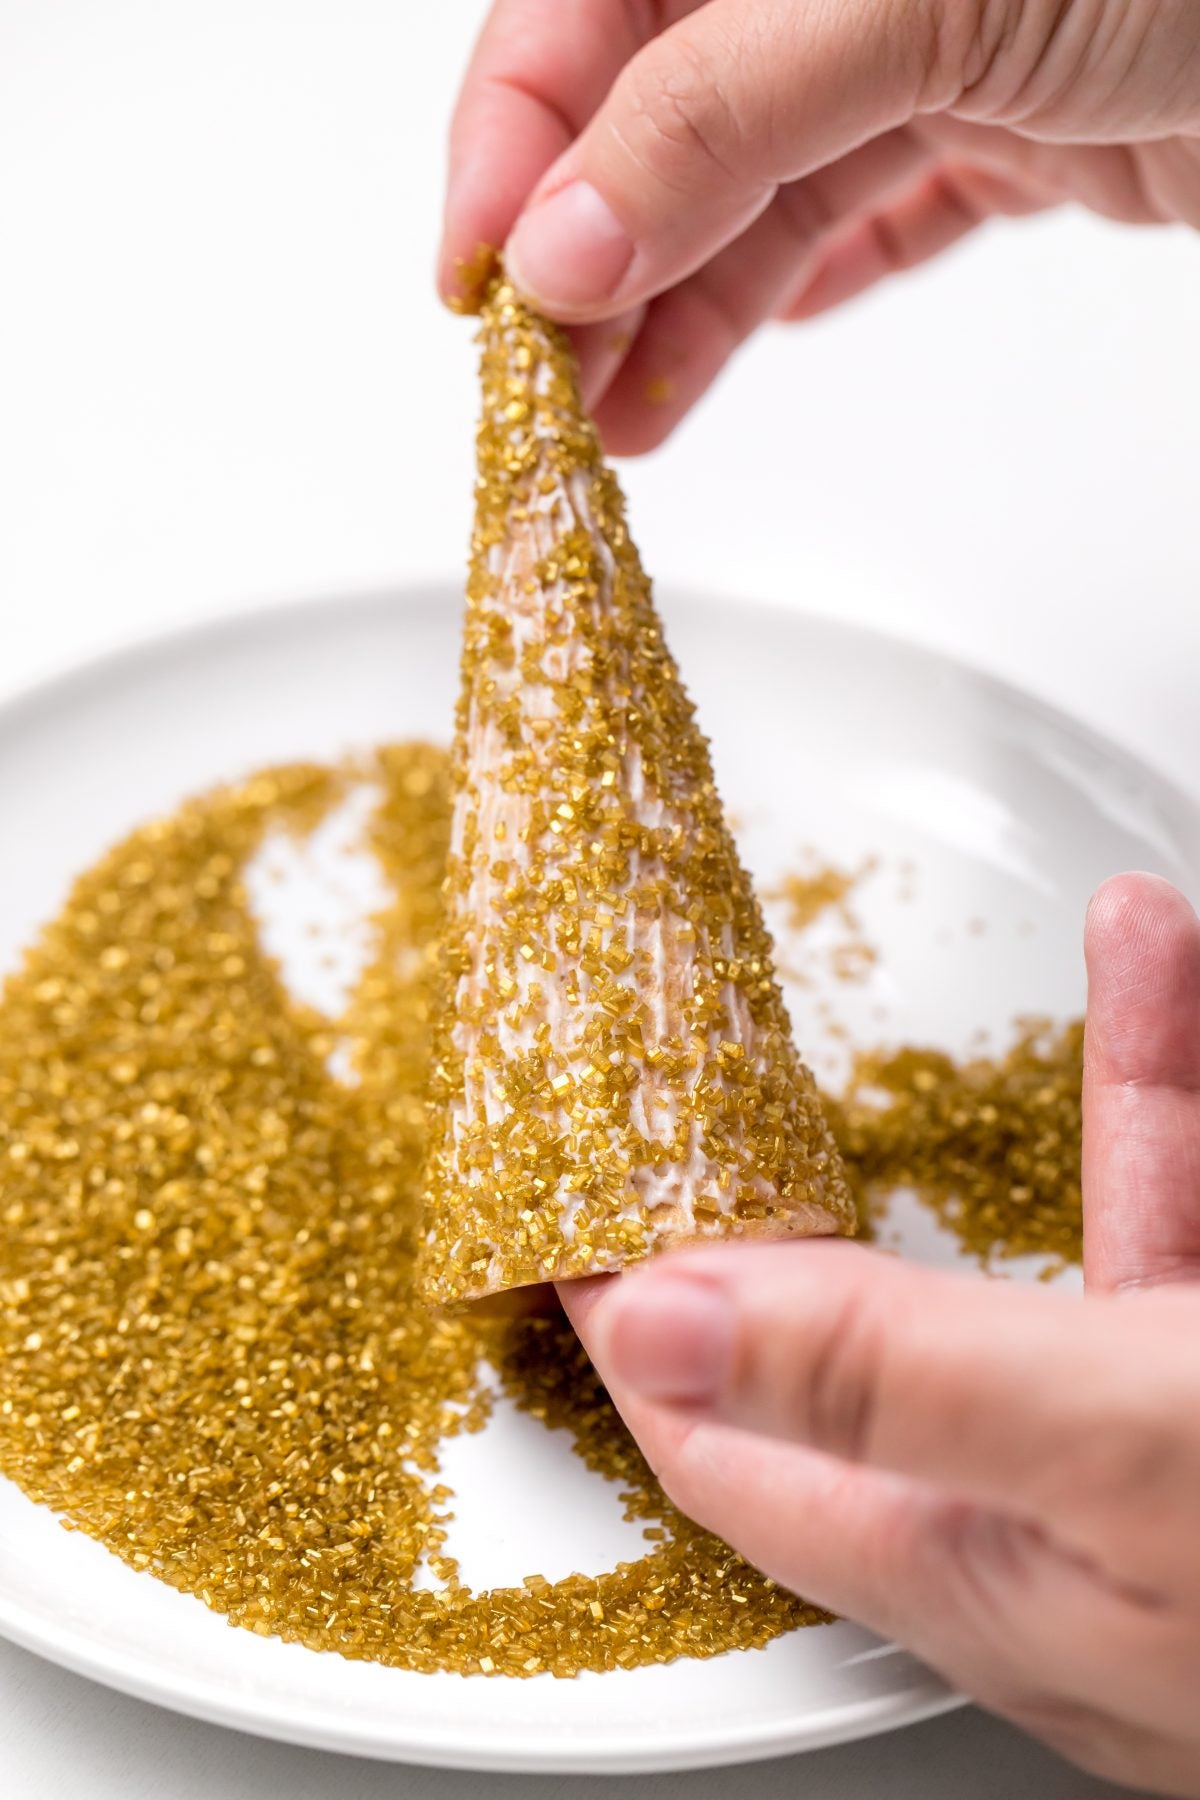 MAKE SURE THE ENTIRE CONE IS ENTIRELY COVERED WITH SPARKLING SUGAR